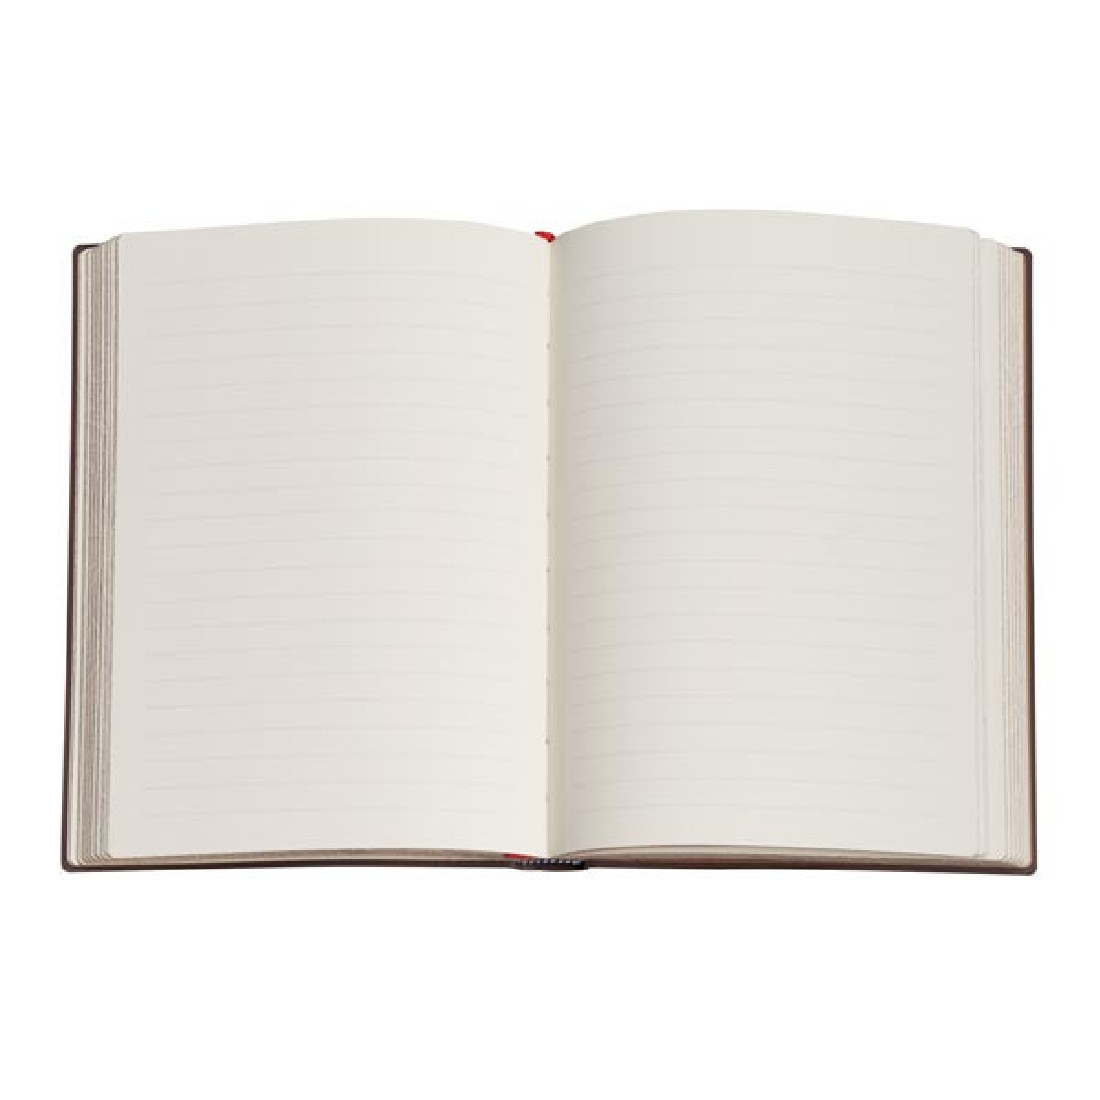 Paerblanks notebook, midi 12x17,5cm, softcover flexis, lined, 176 pages, 100gsm,Michelangelo, Handwriting, 96368